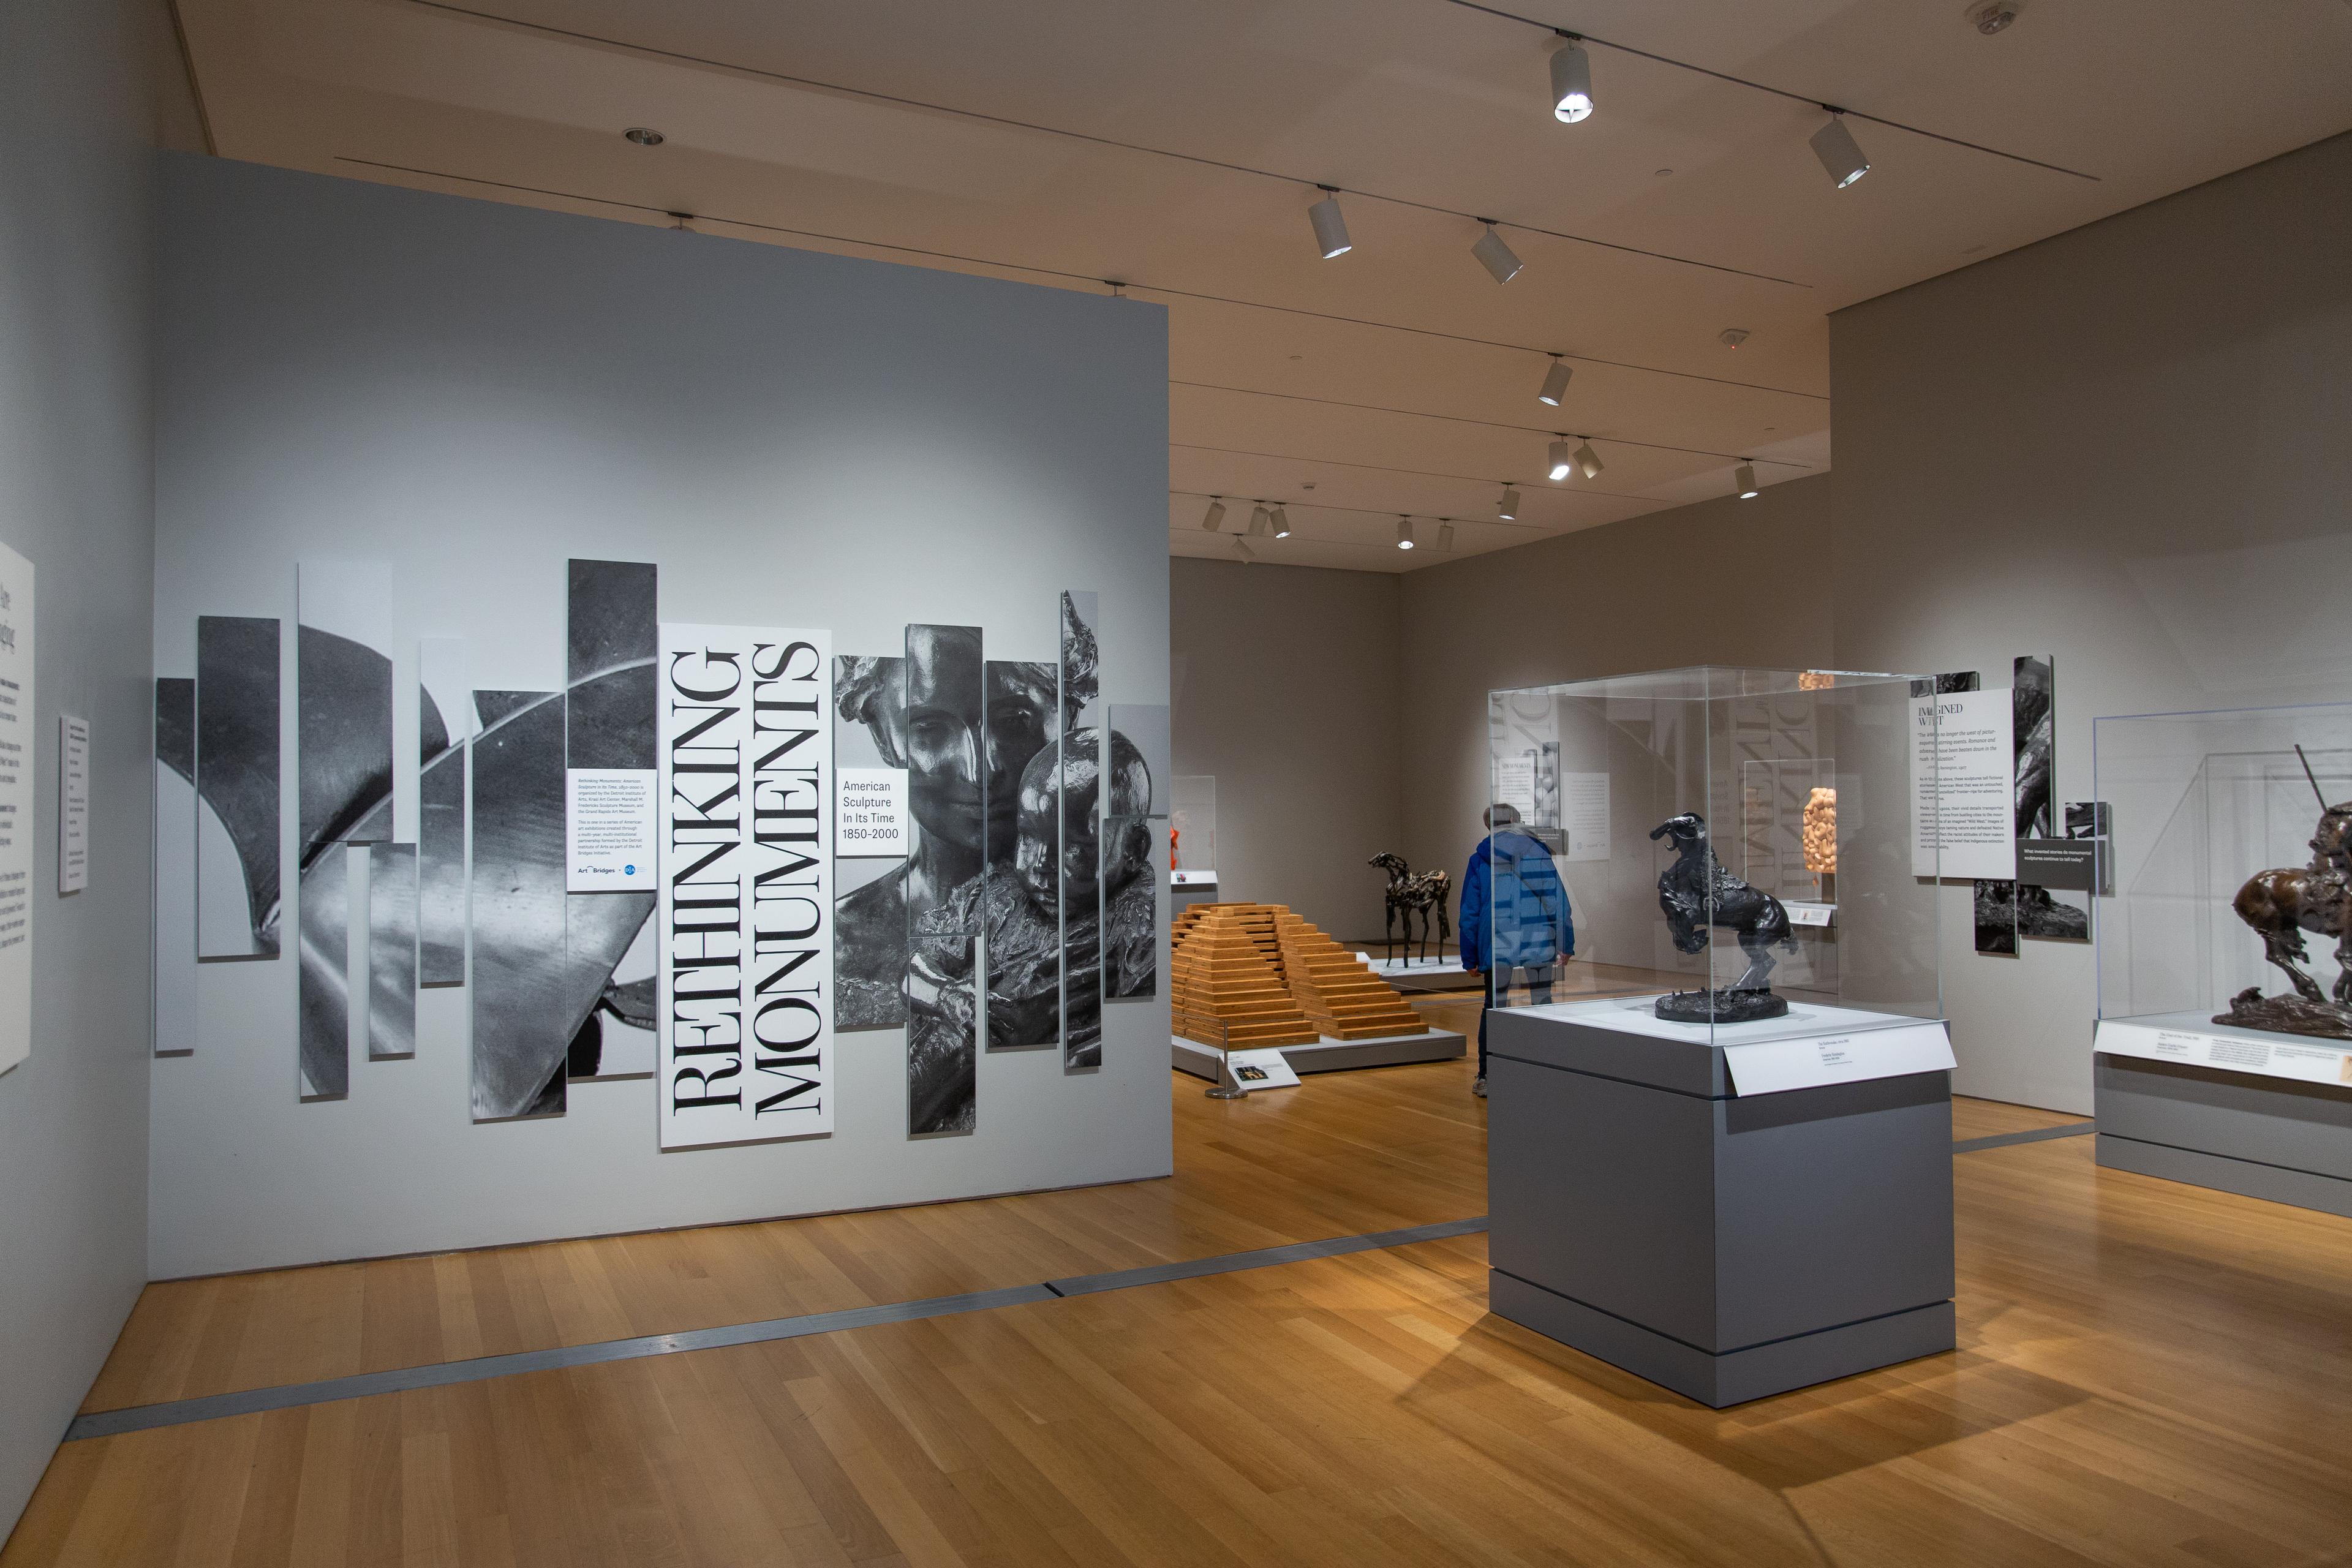 "Rethinking Monuments" featured nearly 20 sculptures ranging from 1850 to 2000